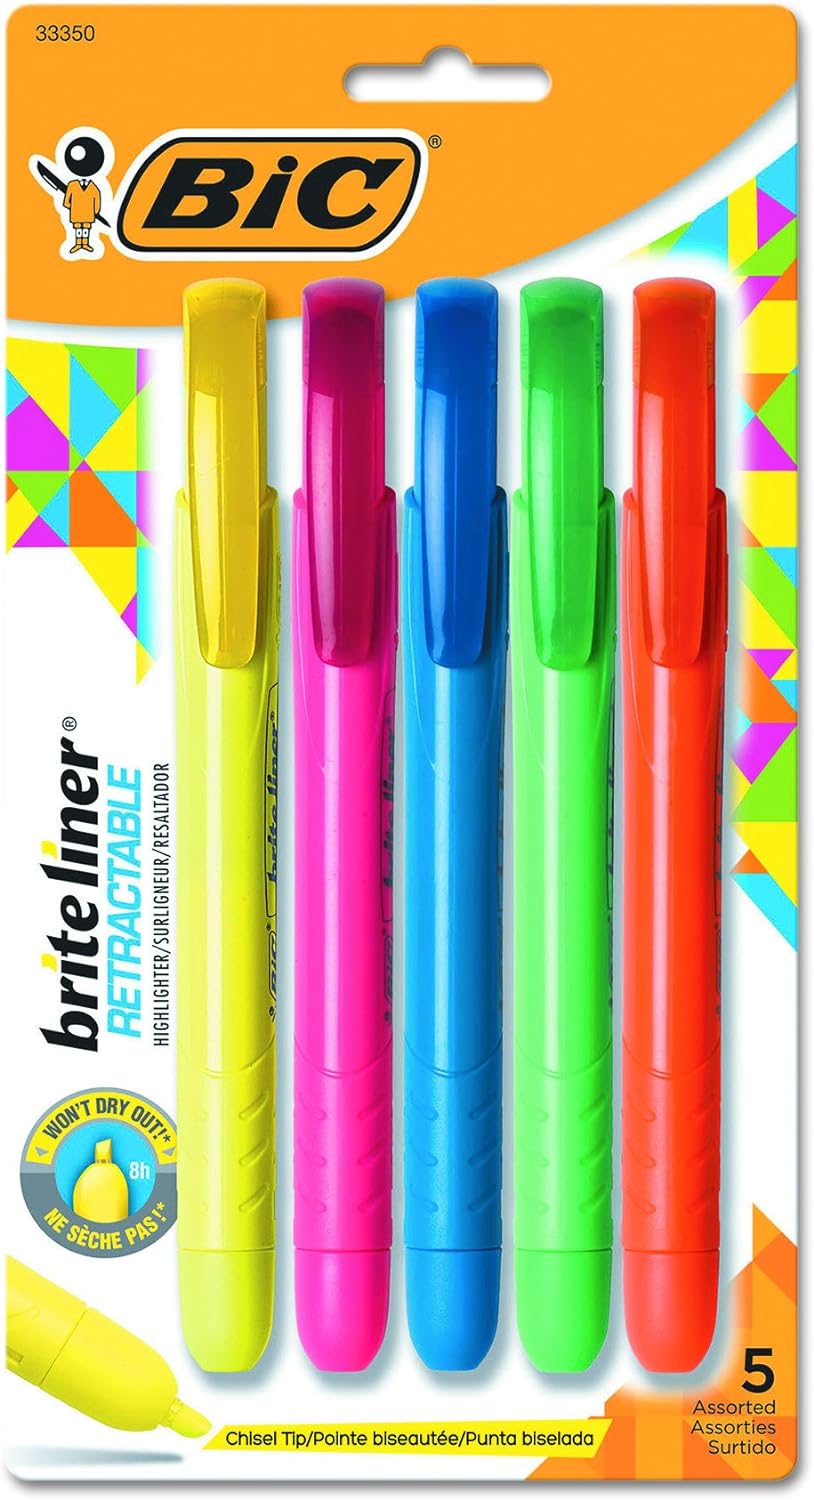 These are super bright fluorescent retractable highlighters. The pack includes yellow, pink, blue, green and orange. They have a nice grip on them. The tip is chiseled so you can have fine line underlining or bold broad highlighting. The ink dries fast and does not smear. I have not had any issues with the ink drying out since they are retractable. I am a college student and use highlighters all the time, and rely on different colors for different types of notes that I am taking. Having to repea